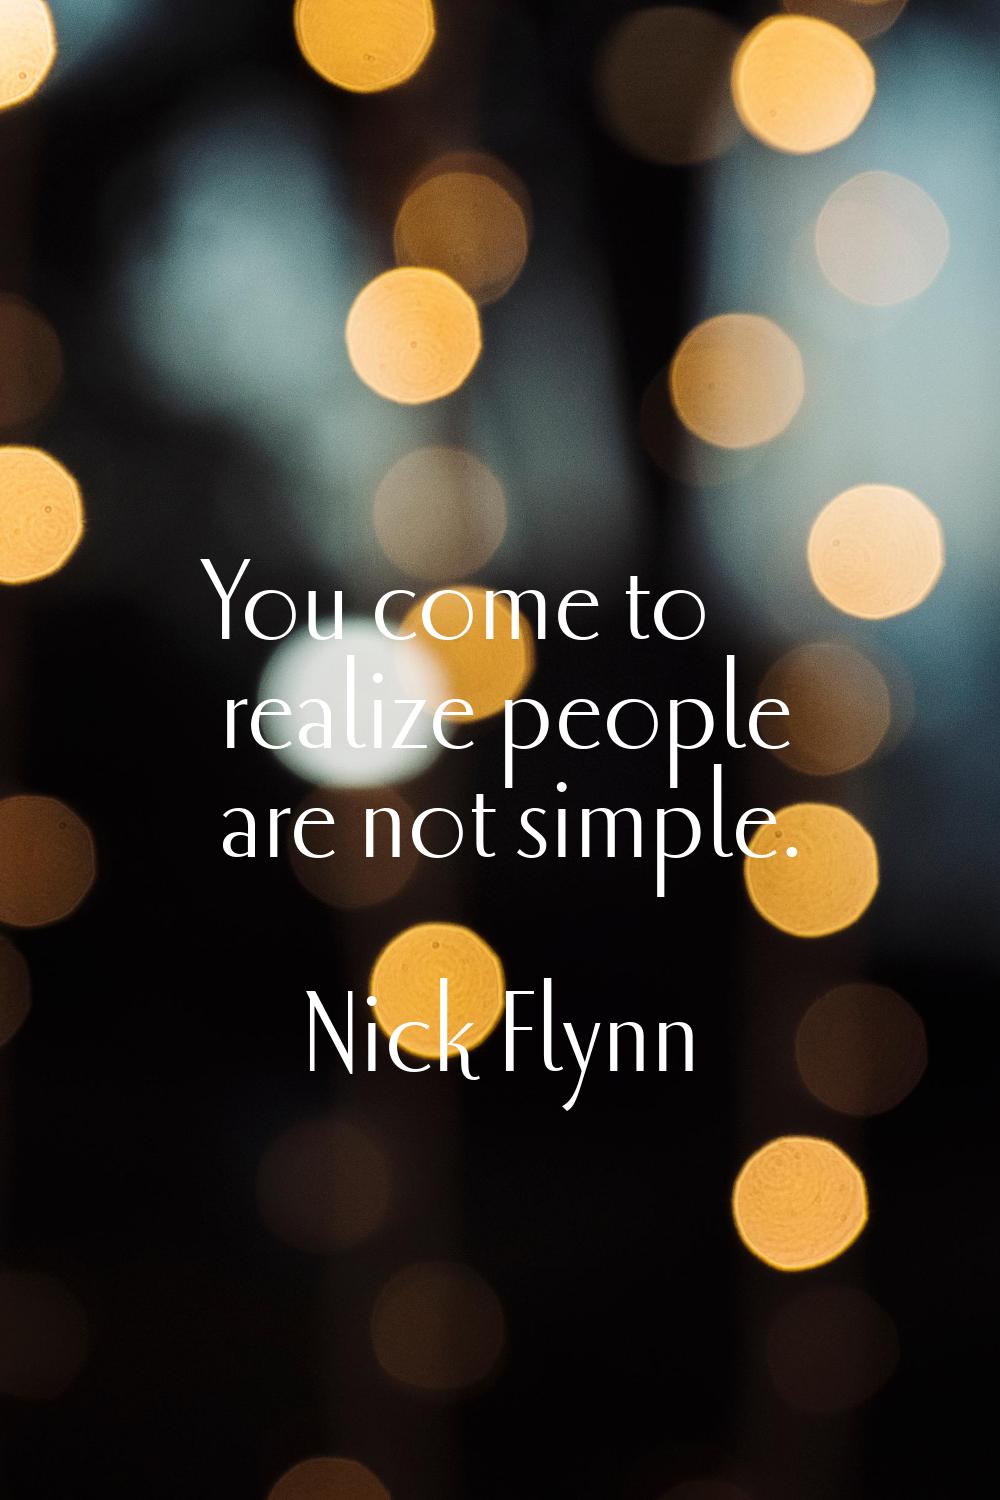 You come to realize people are not simple.